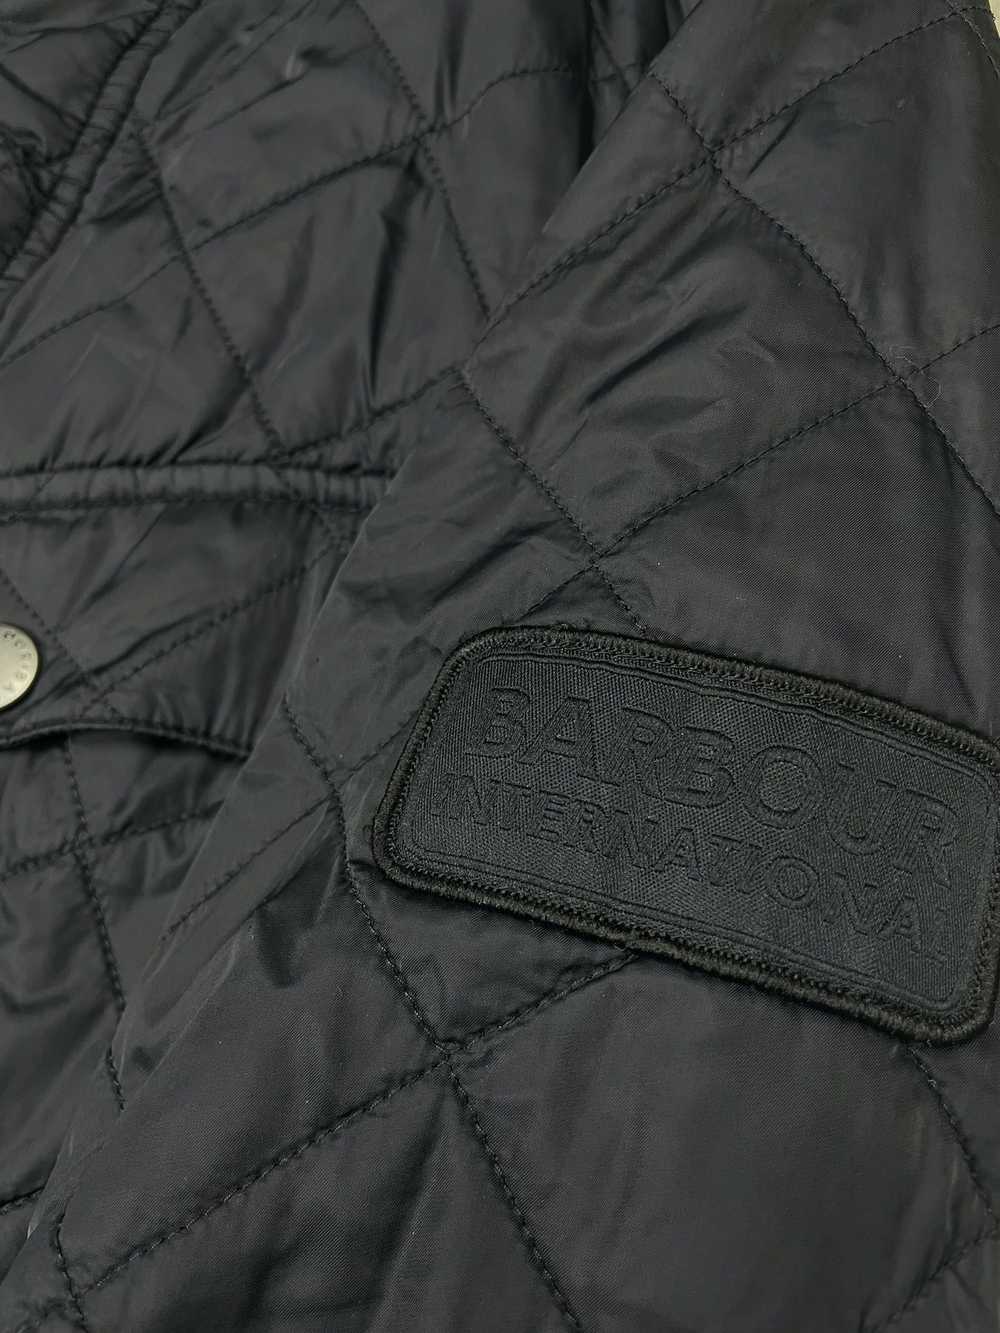 Barbour Barbour International Quilted Jacket - image 2